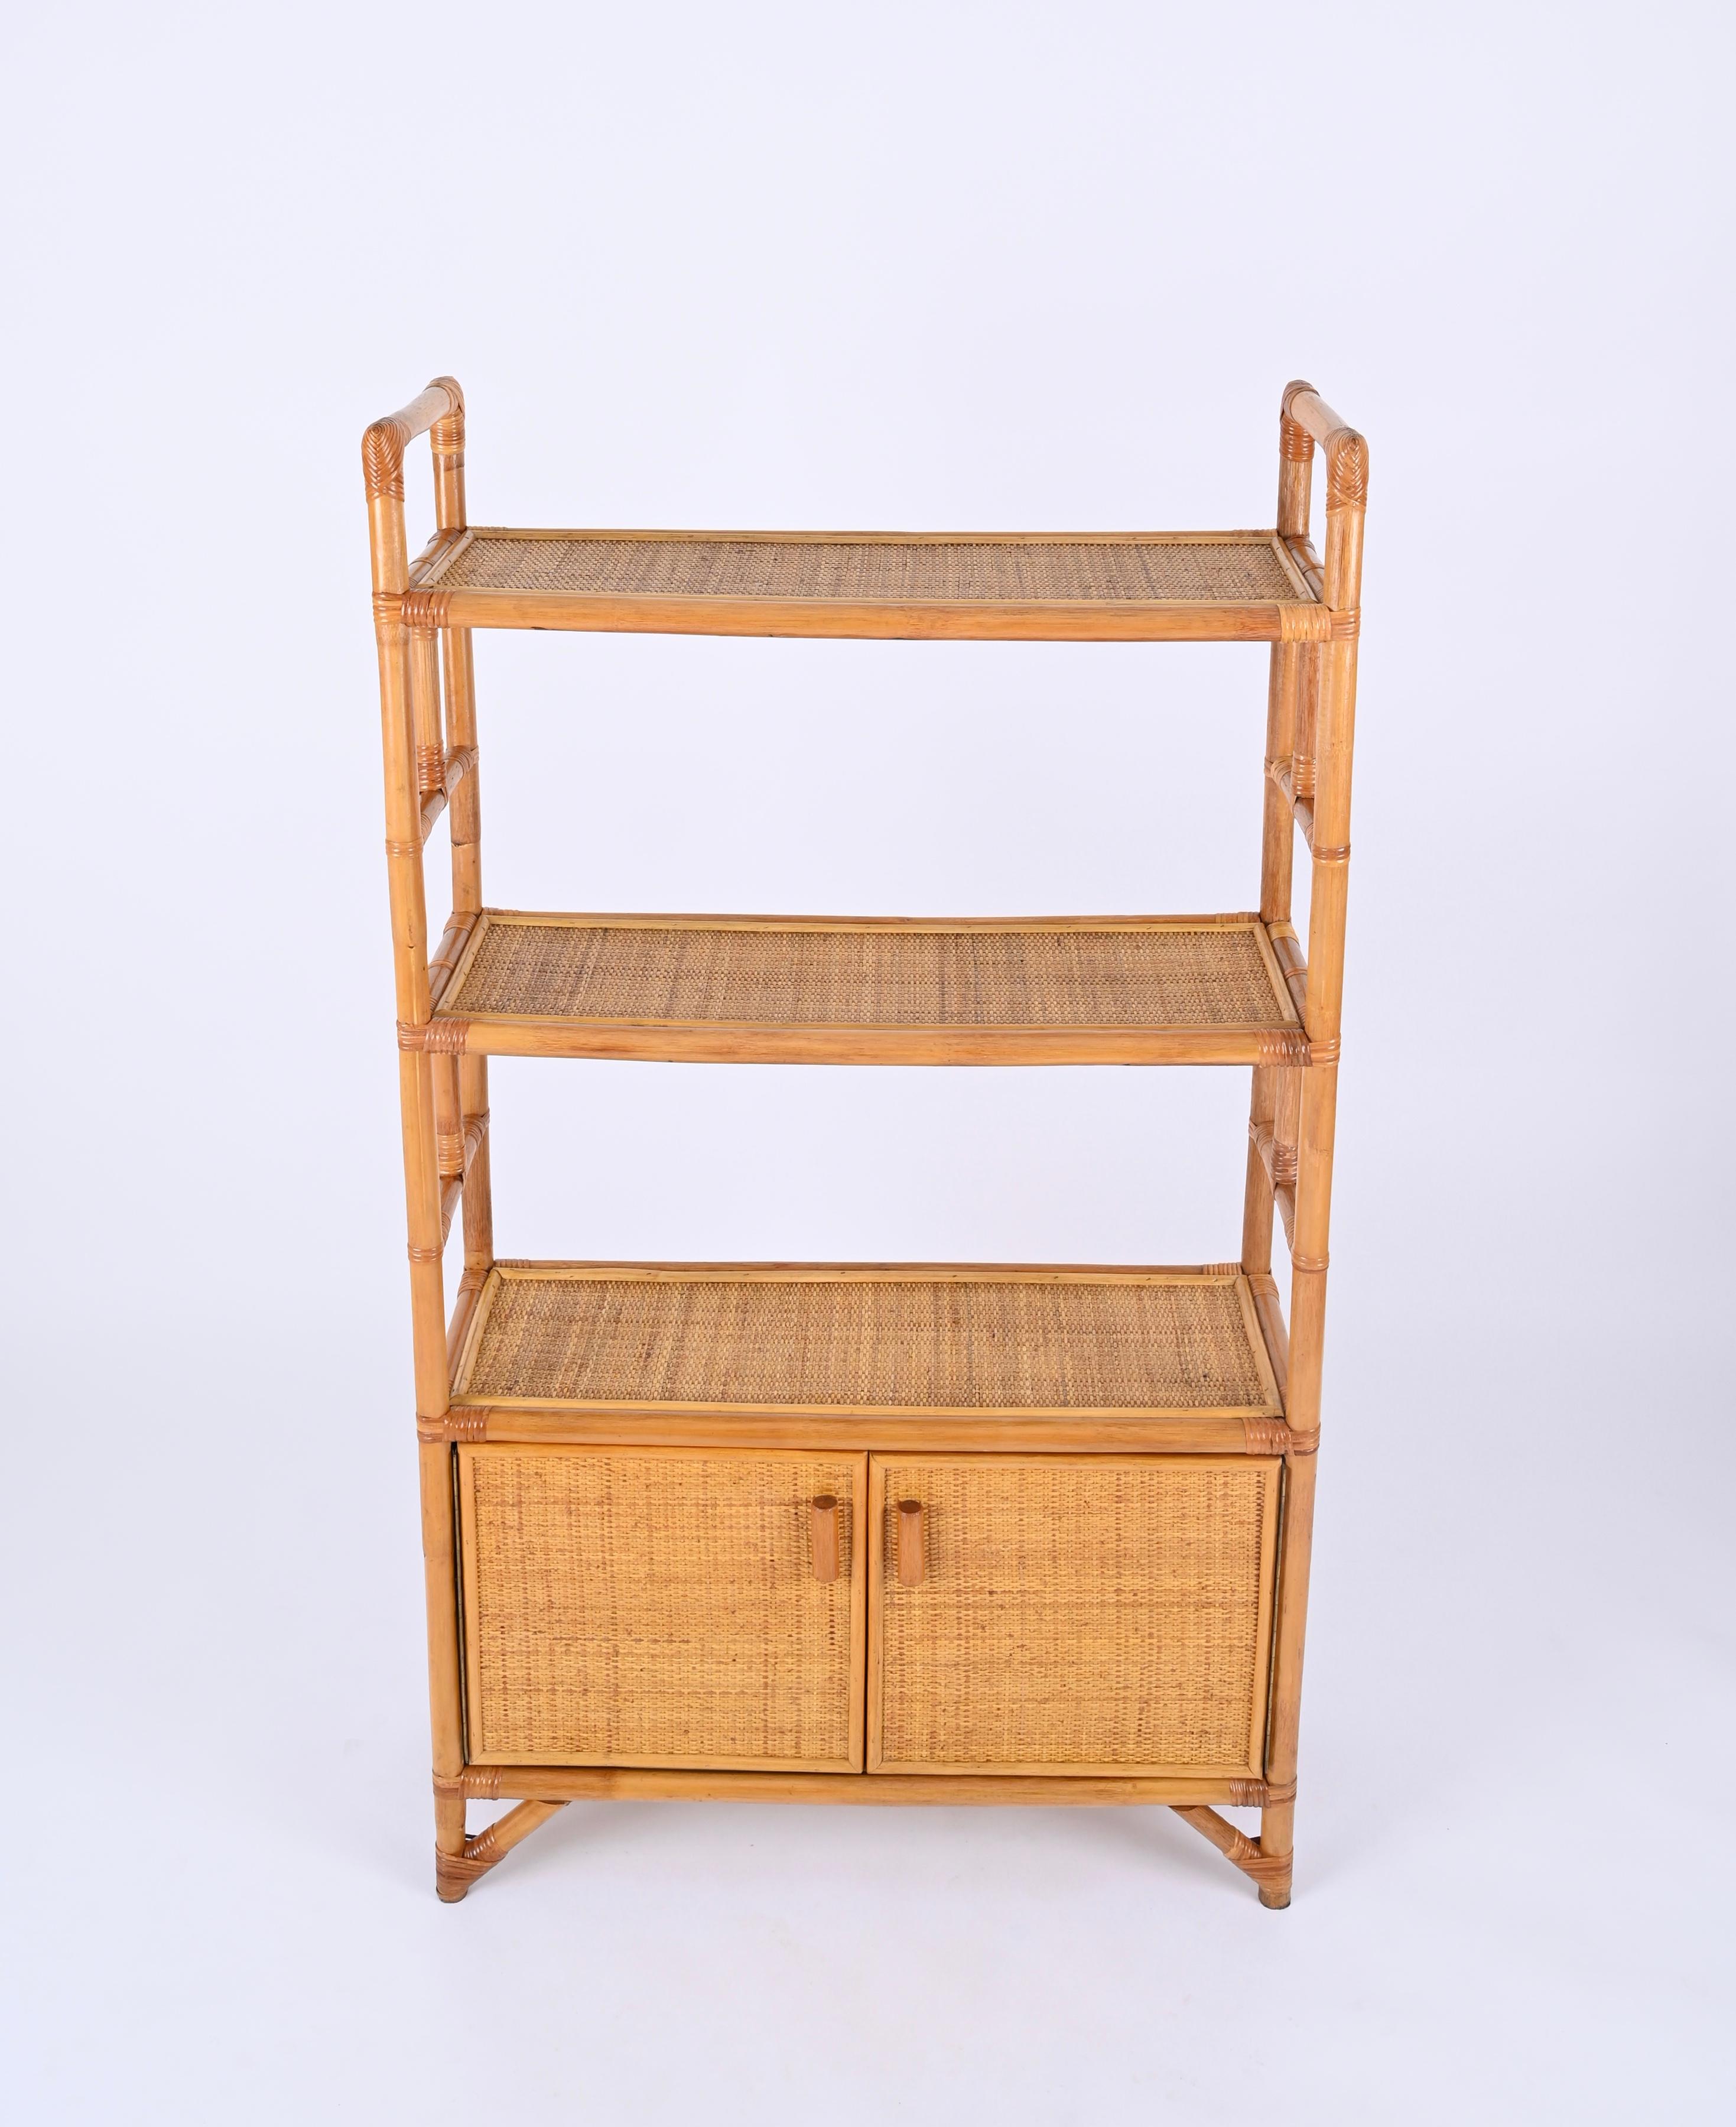 Midcentury Italian Modern Rattan and Bamboo Bookcase with Doors, 1970s For Sale 2